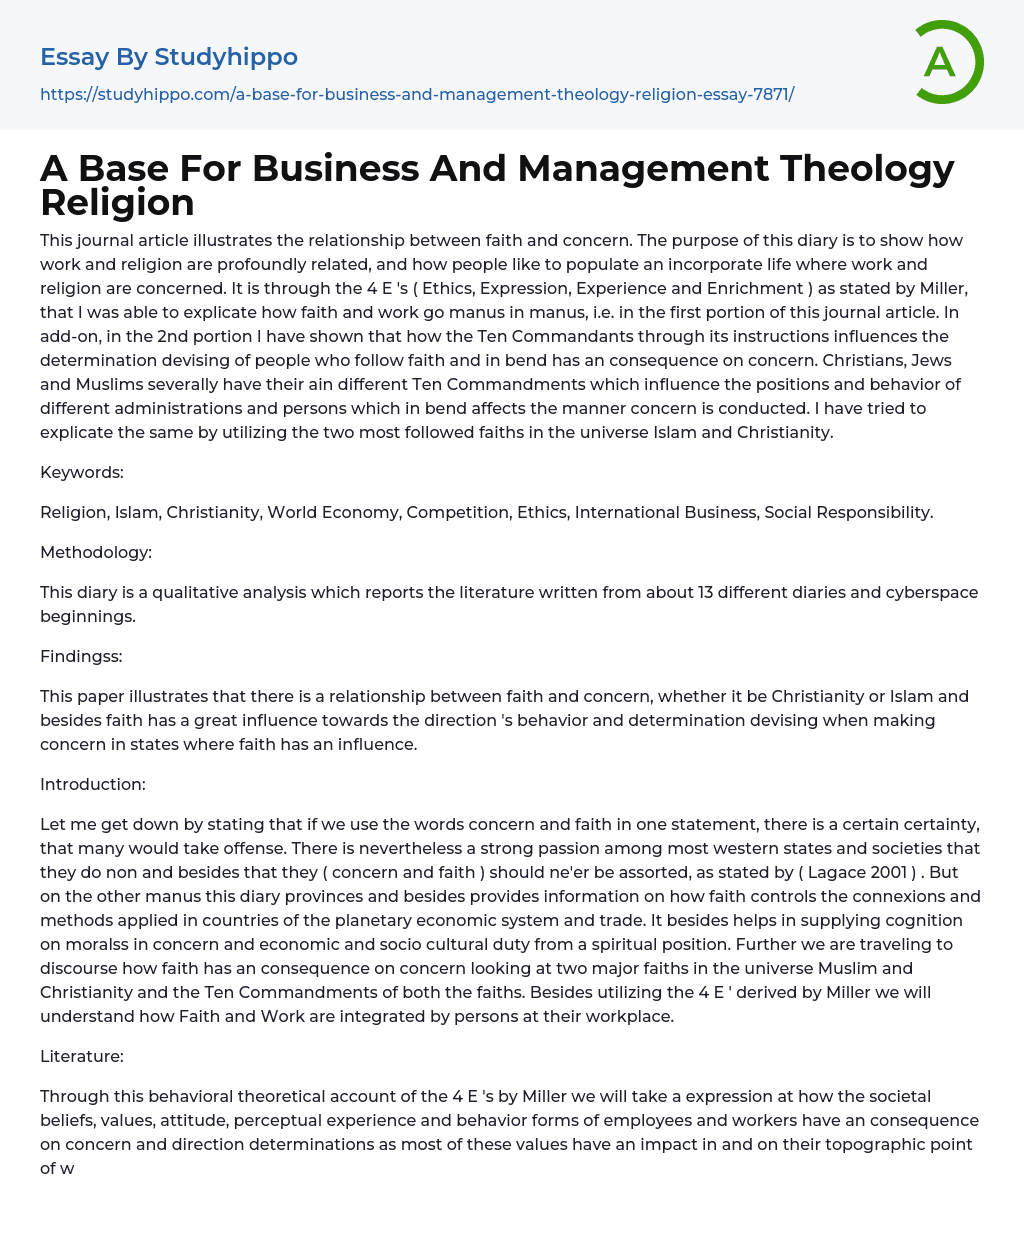 A Base For Business And Management Theology Religion Essay Example